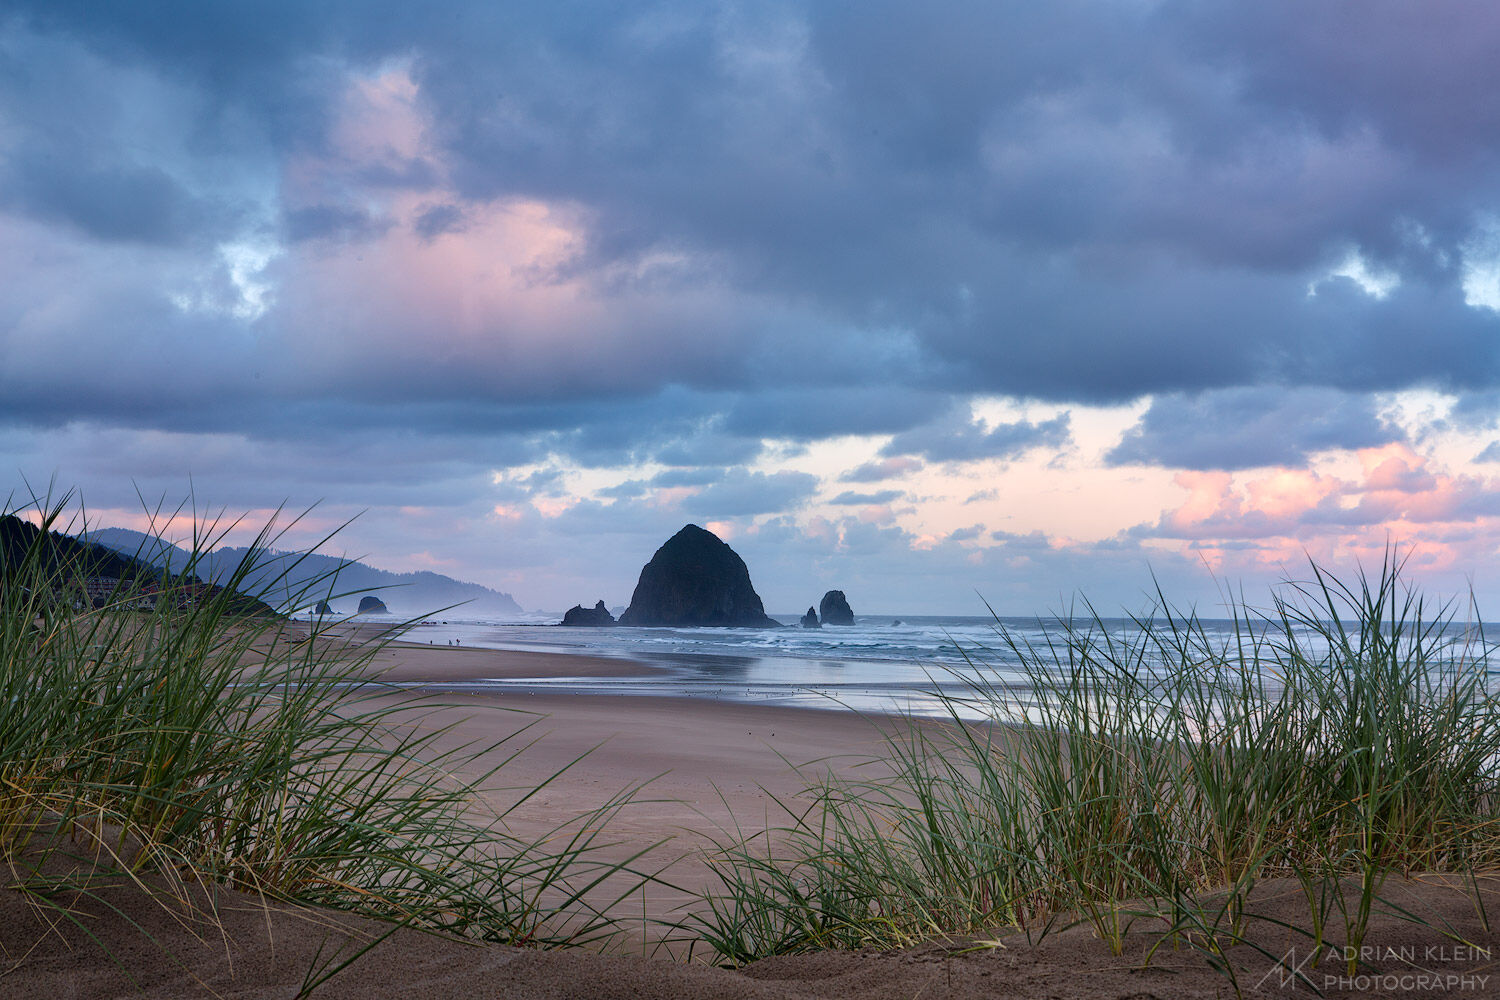 Walking on the dunes this view between grasses shows the morning light and Haystack Rock in Cannon Beach, Oregon. Limited Edition...